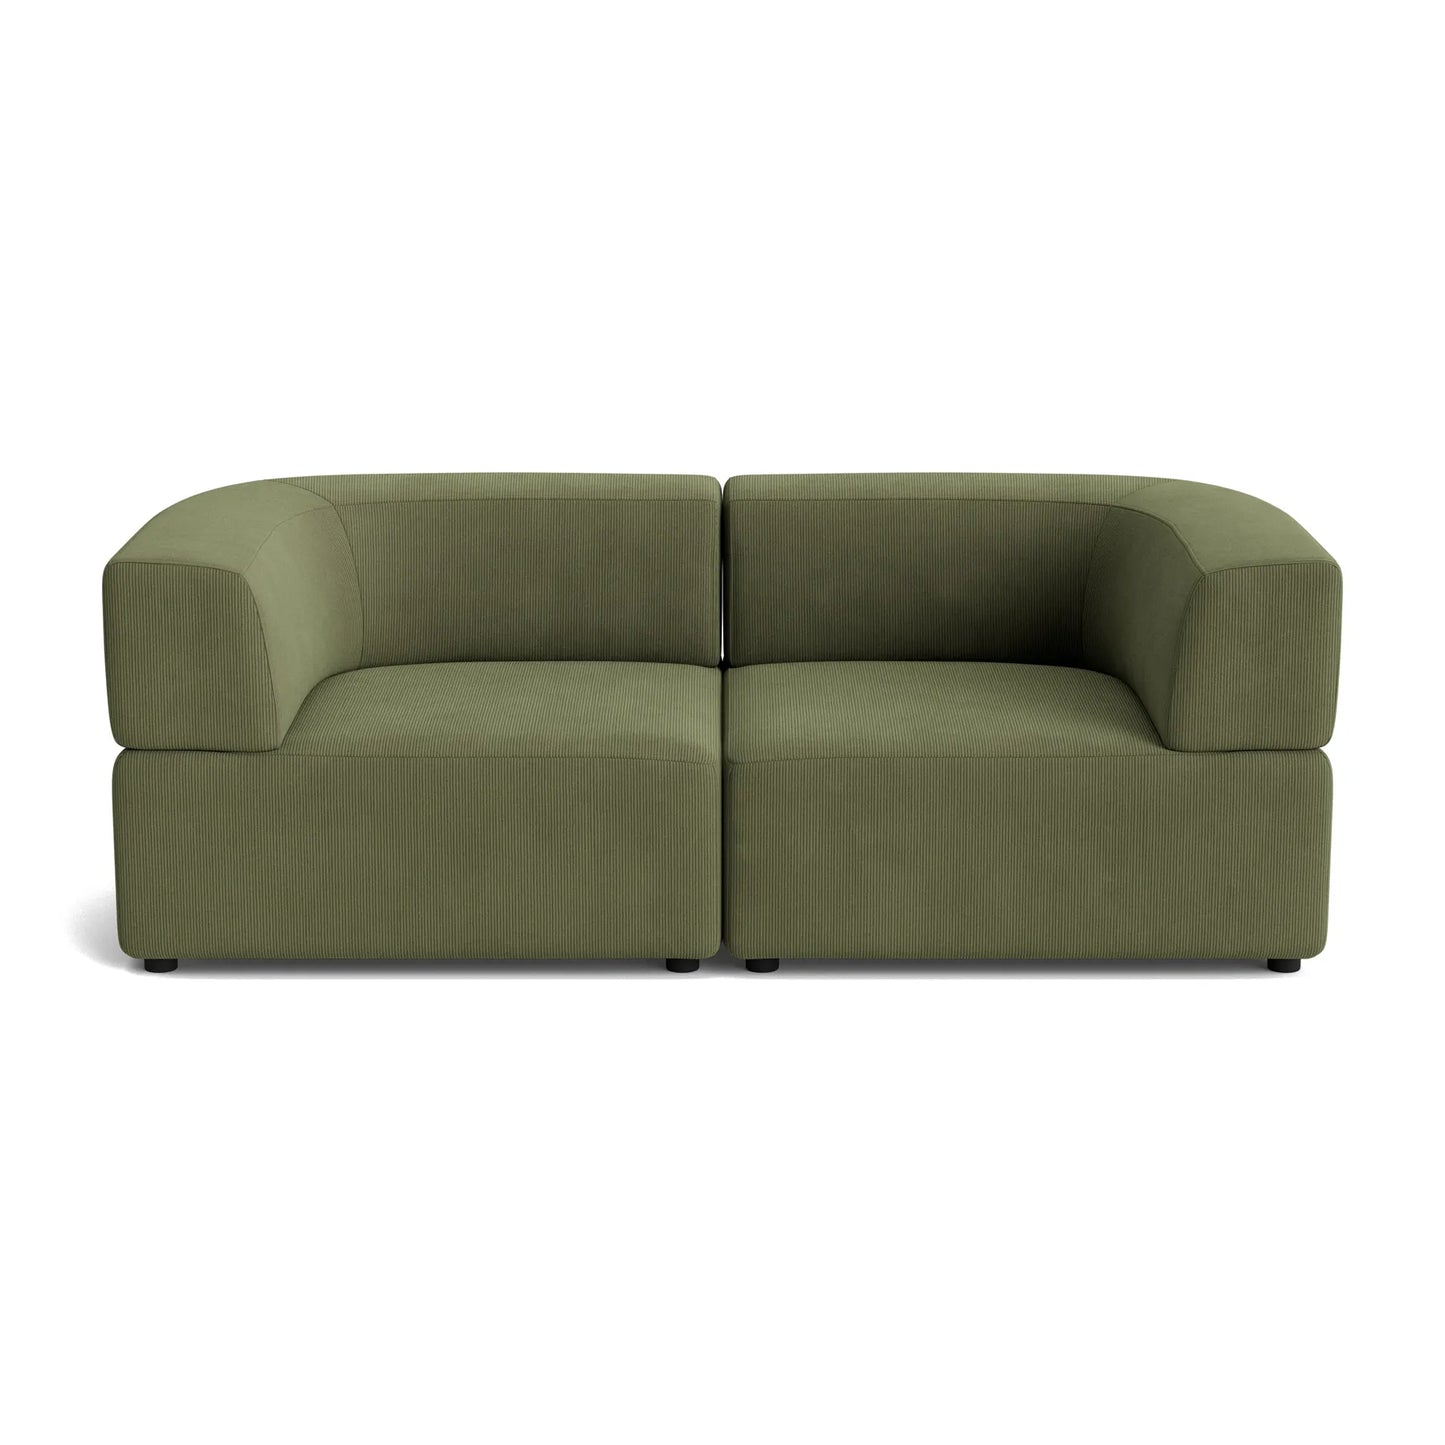 Stretch 3 Seater Sofa - Corduroy Forest